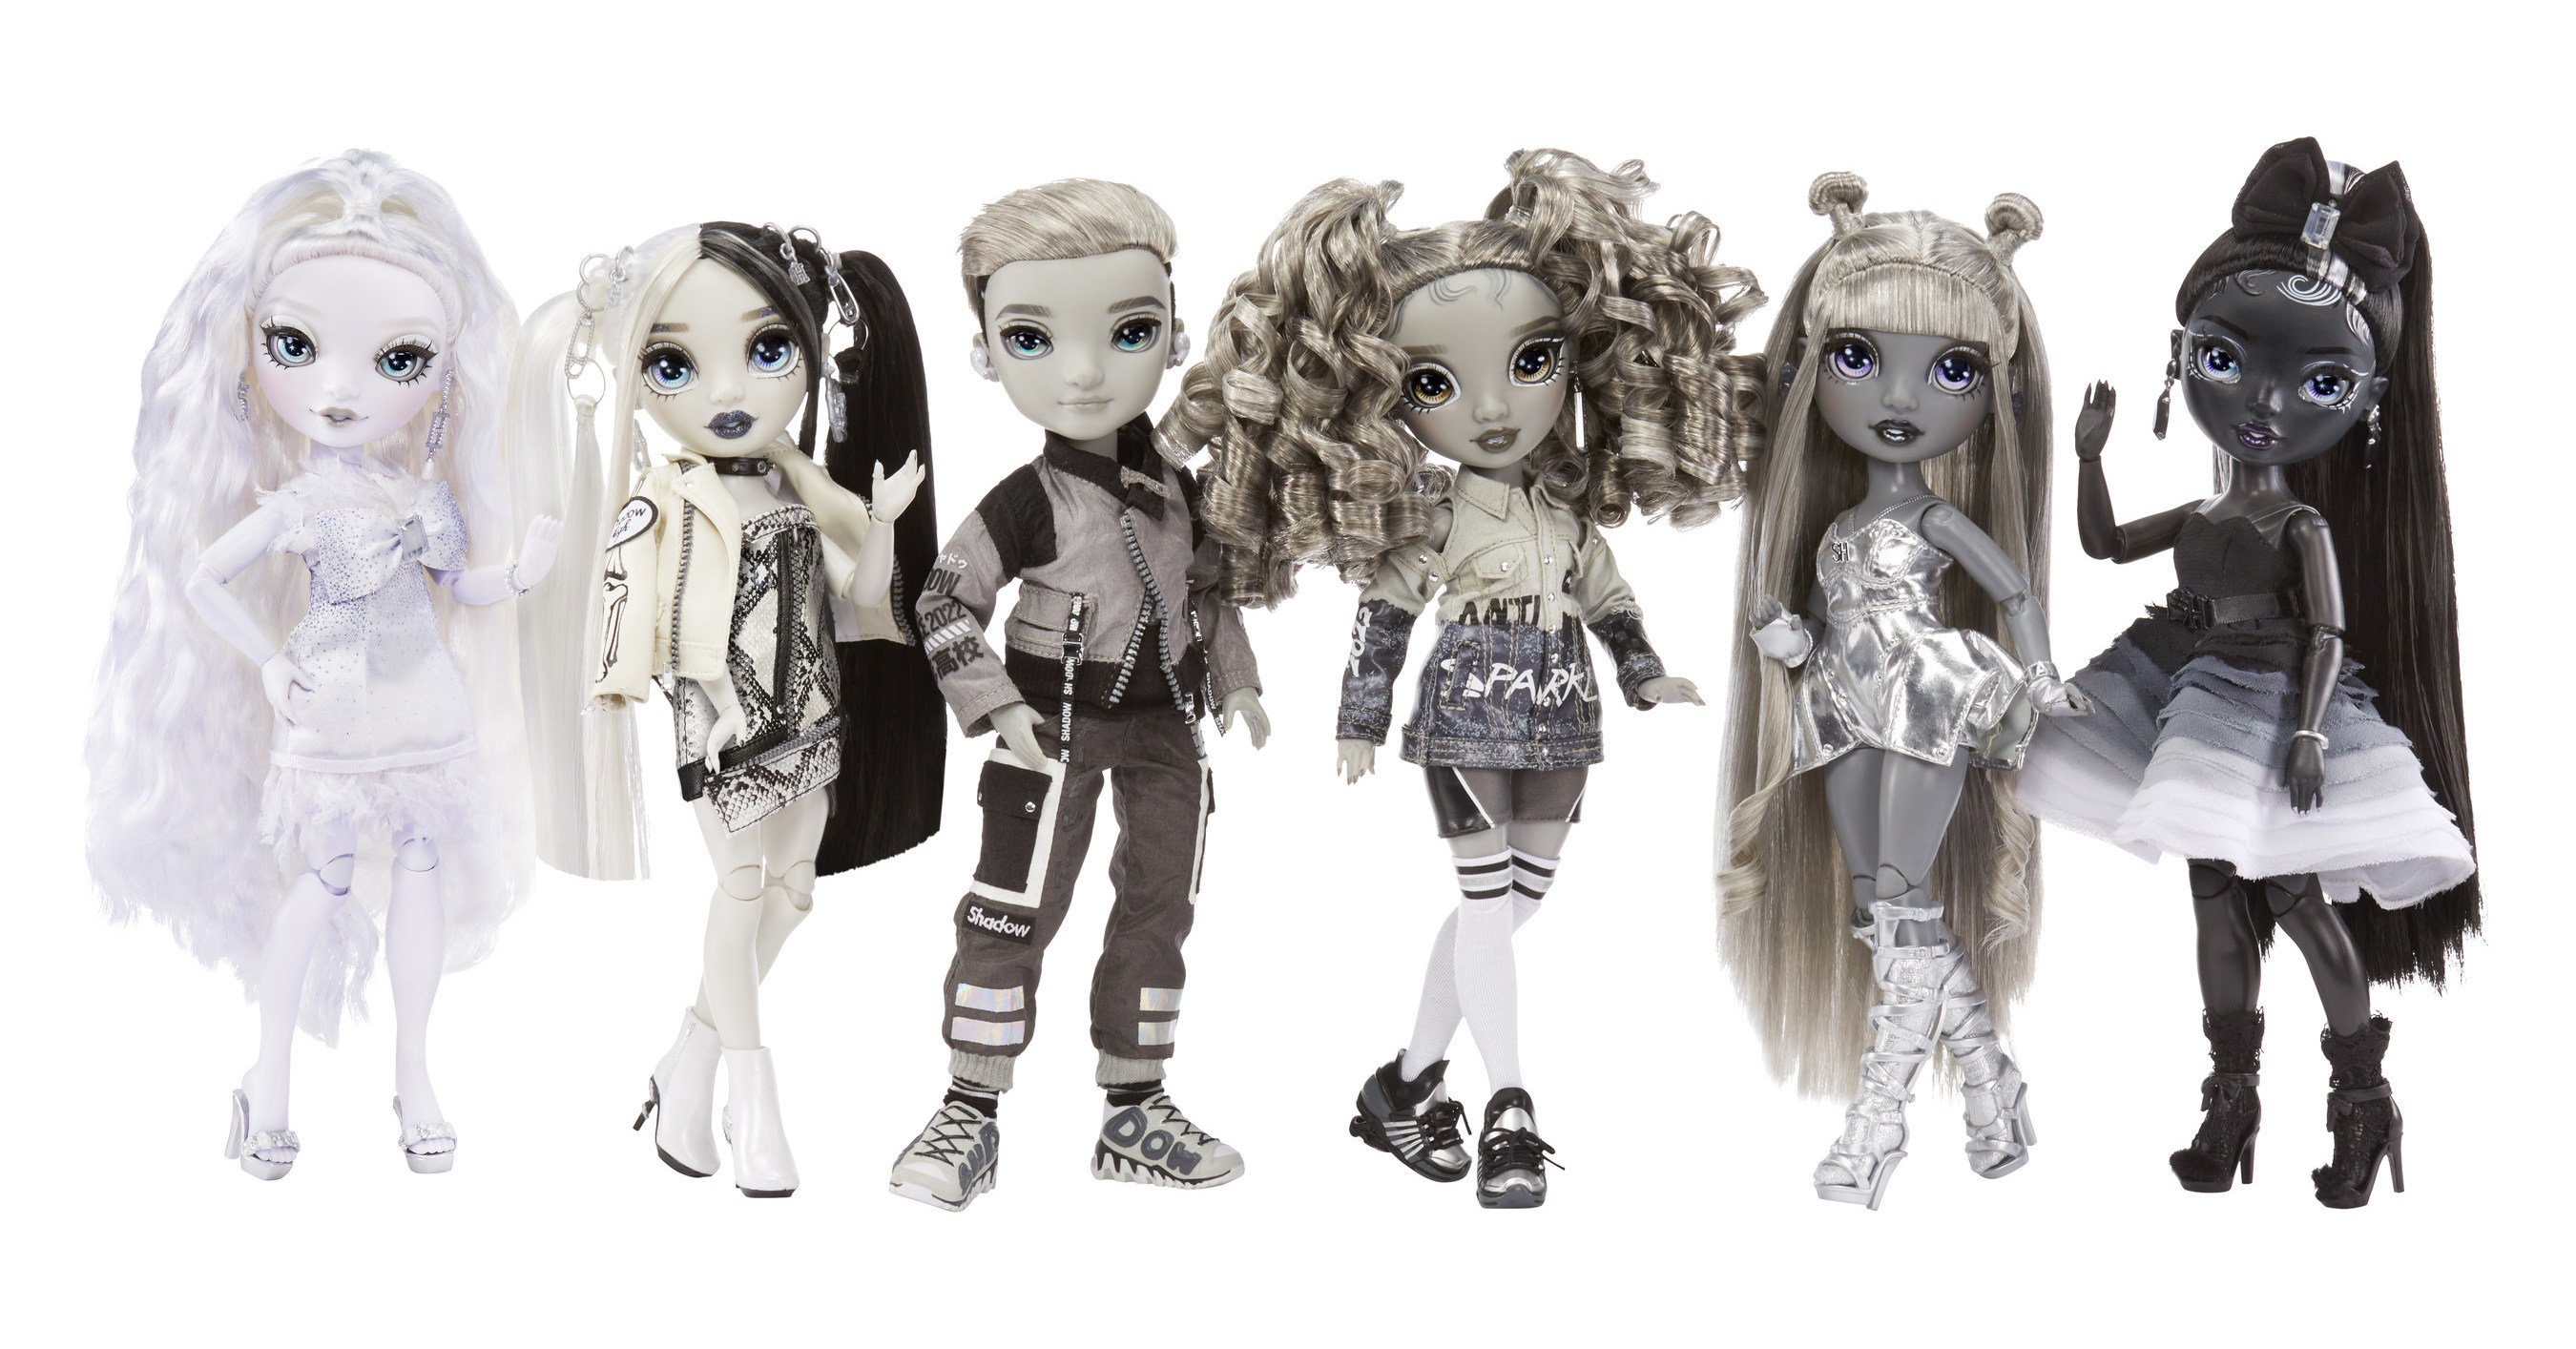 PRESS RELEASE: Top Global Doll Brands L.O.L. Surprise!™ and Rainbow High™  make their high